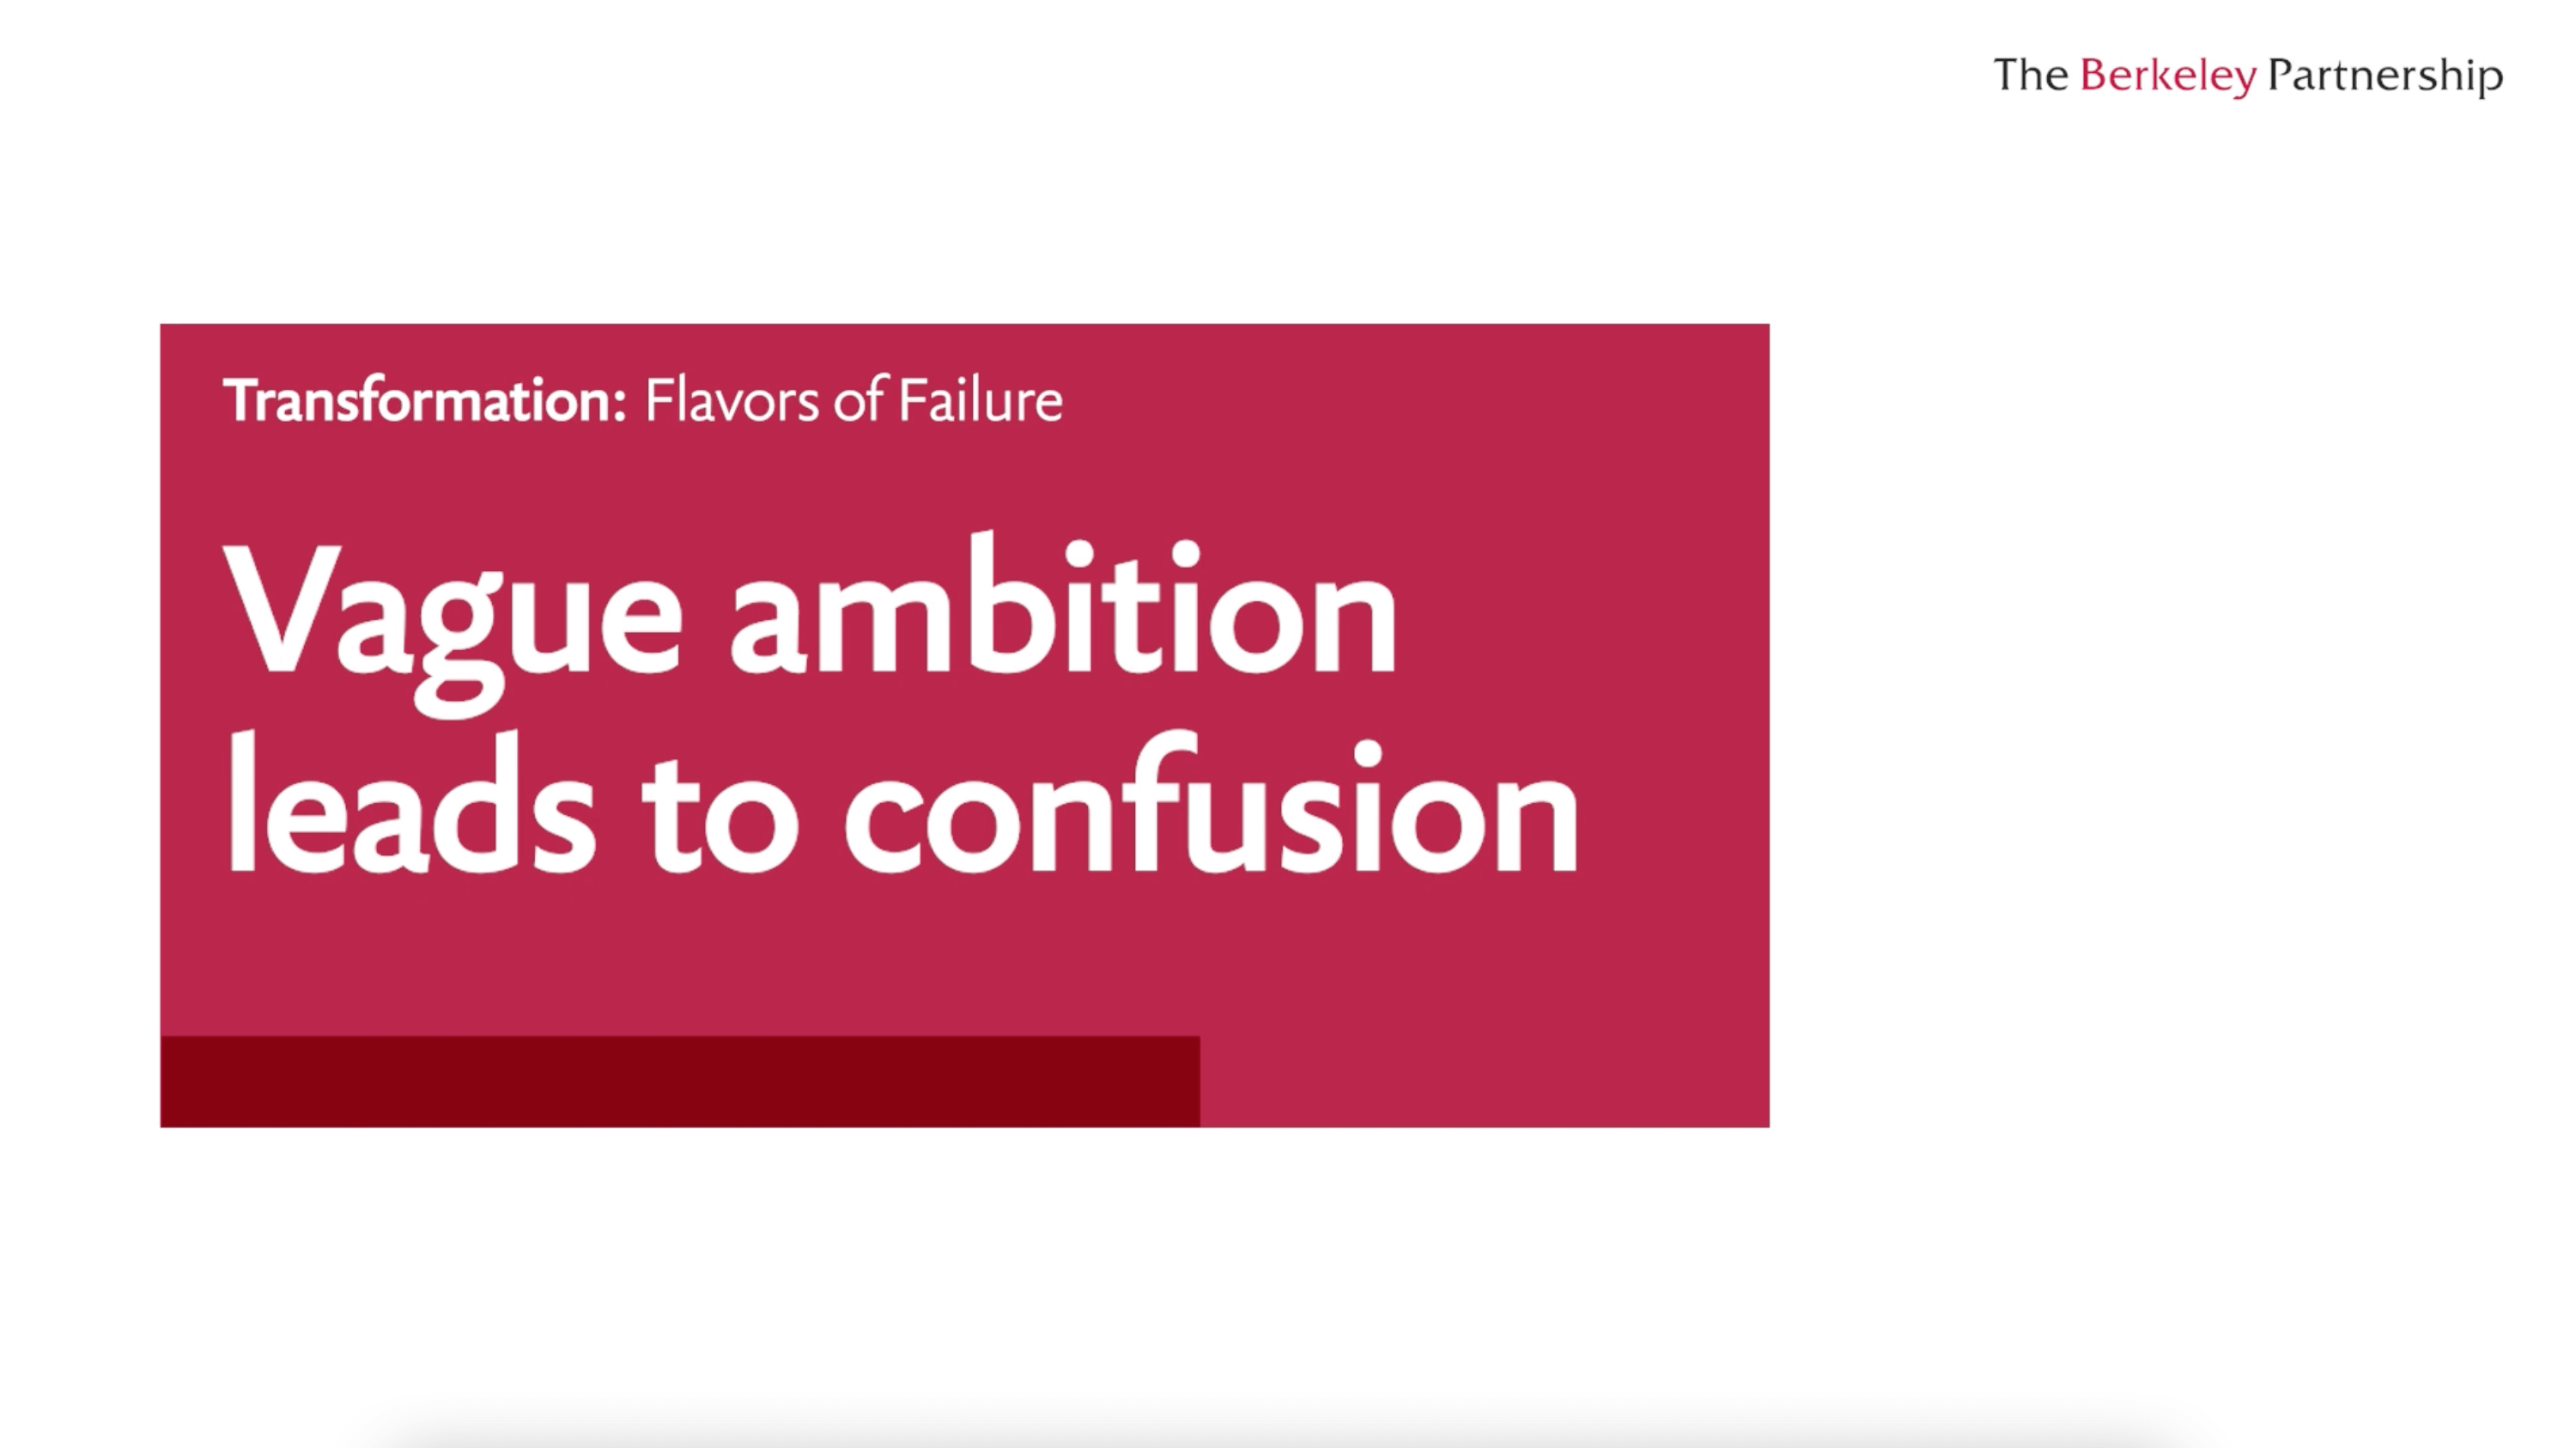 Flavors of failure: Vague ambition leads to confusion